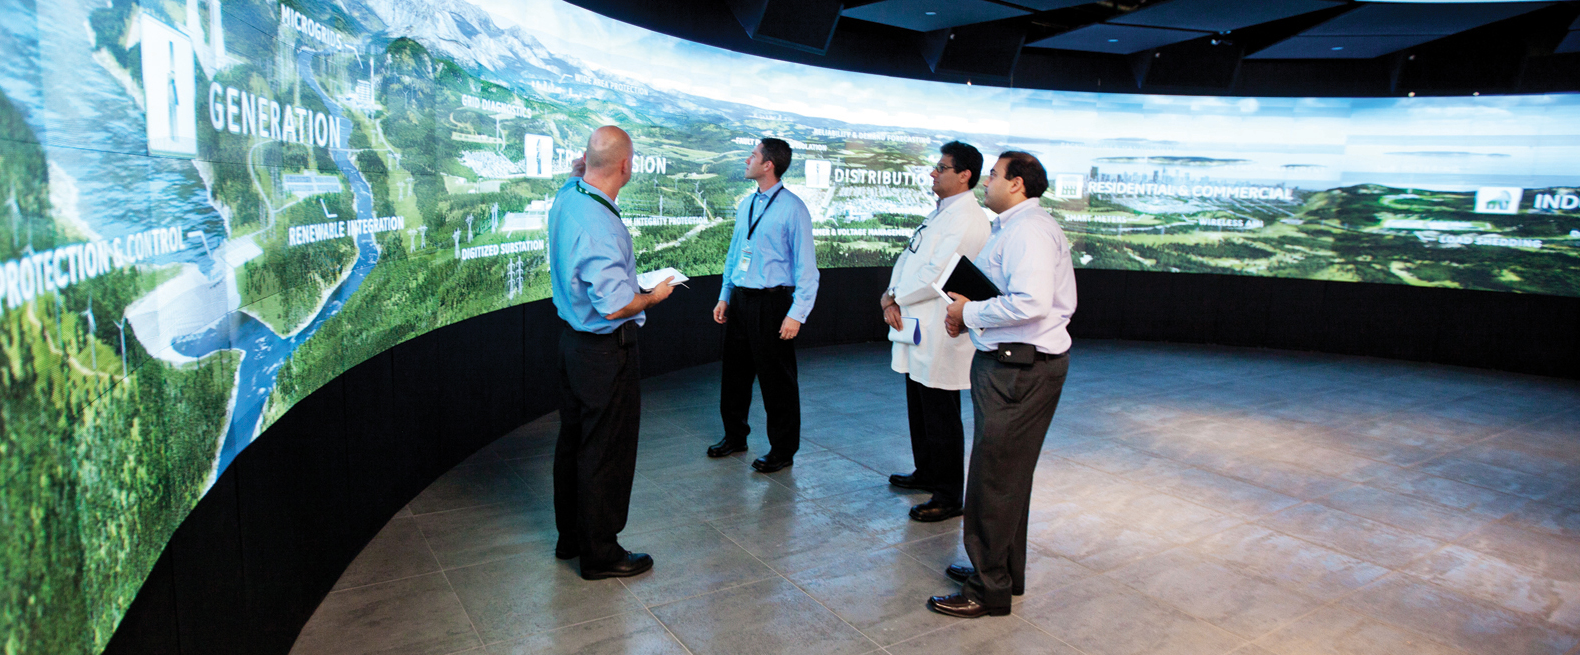 Prysm Video Wall at GE Customer Experience Center